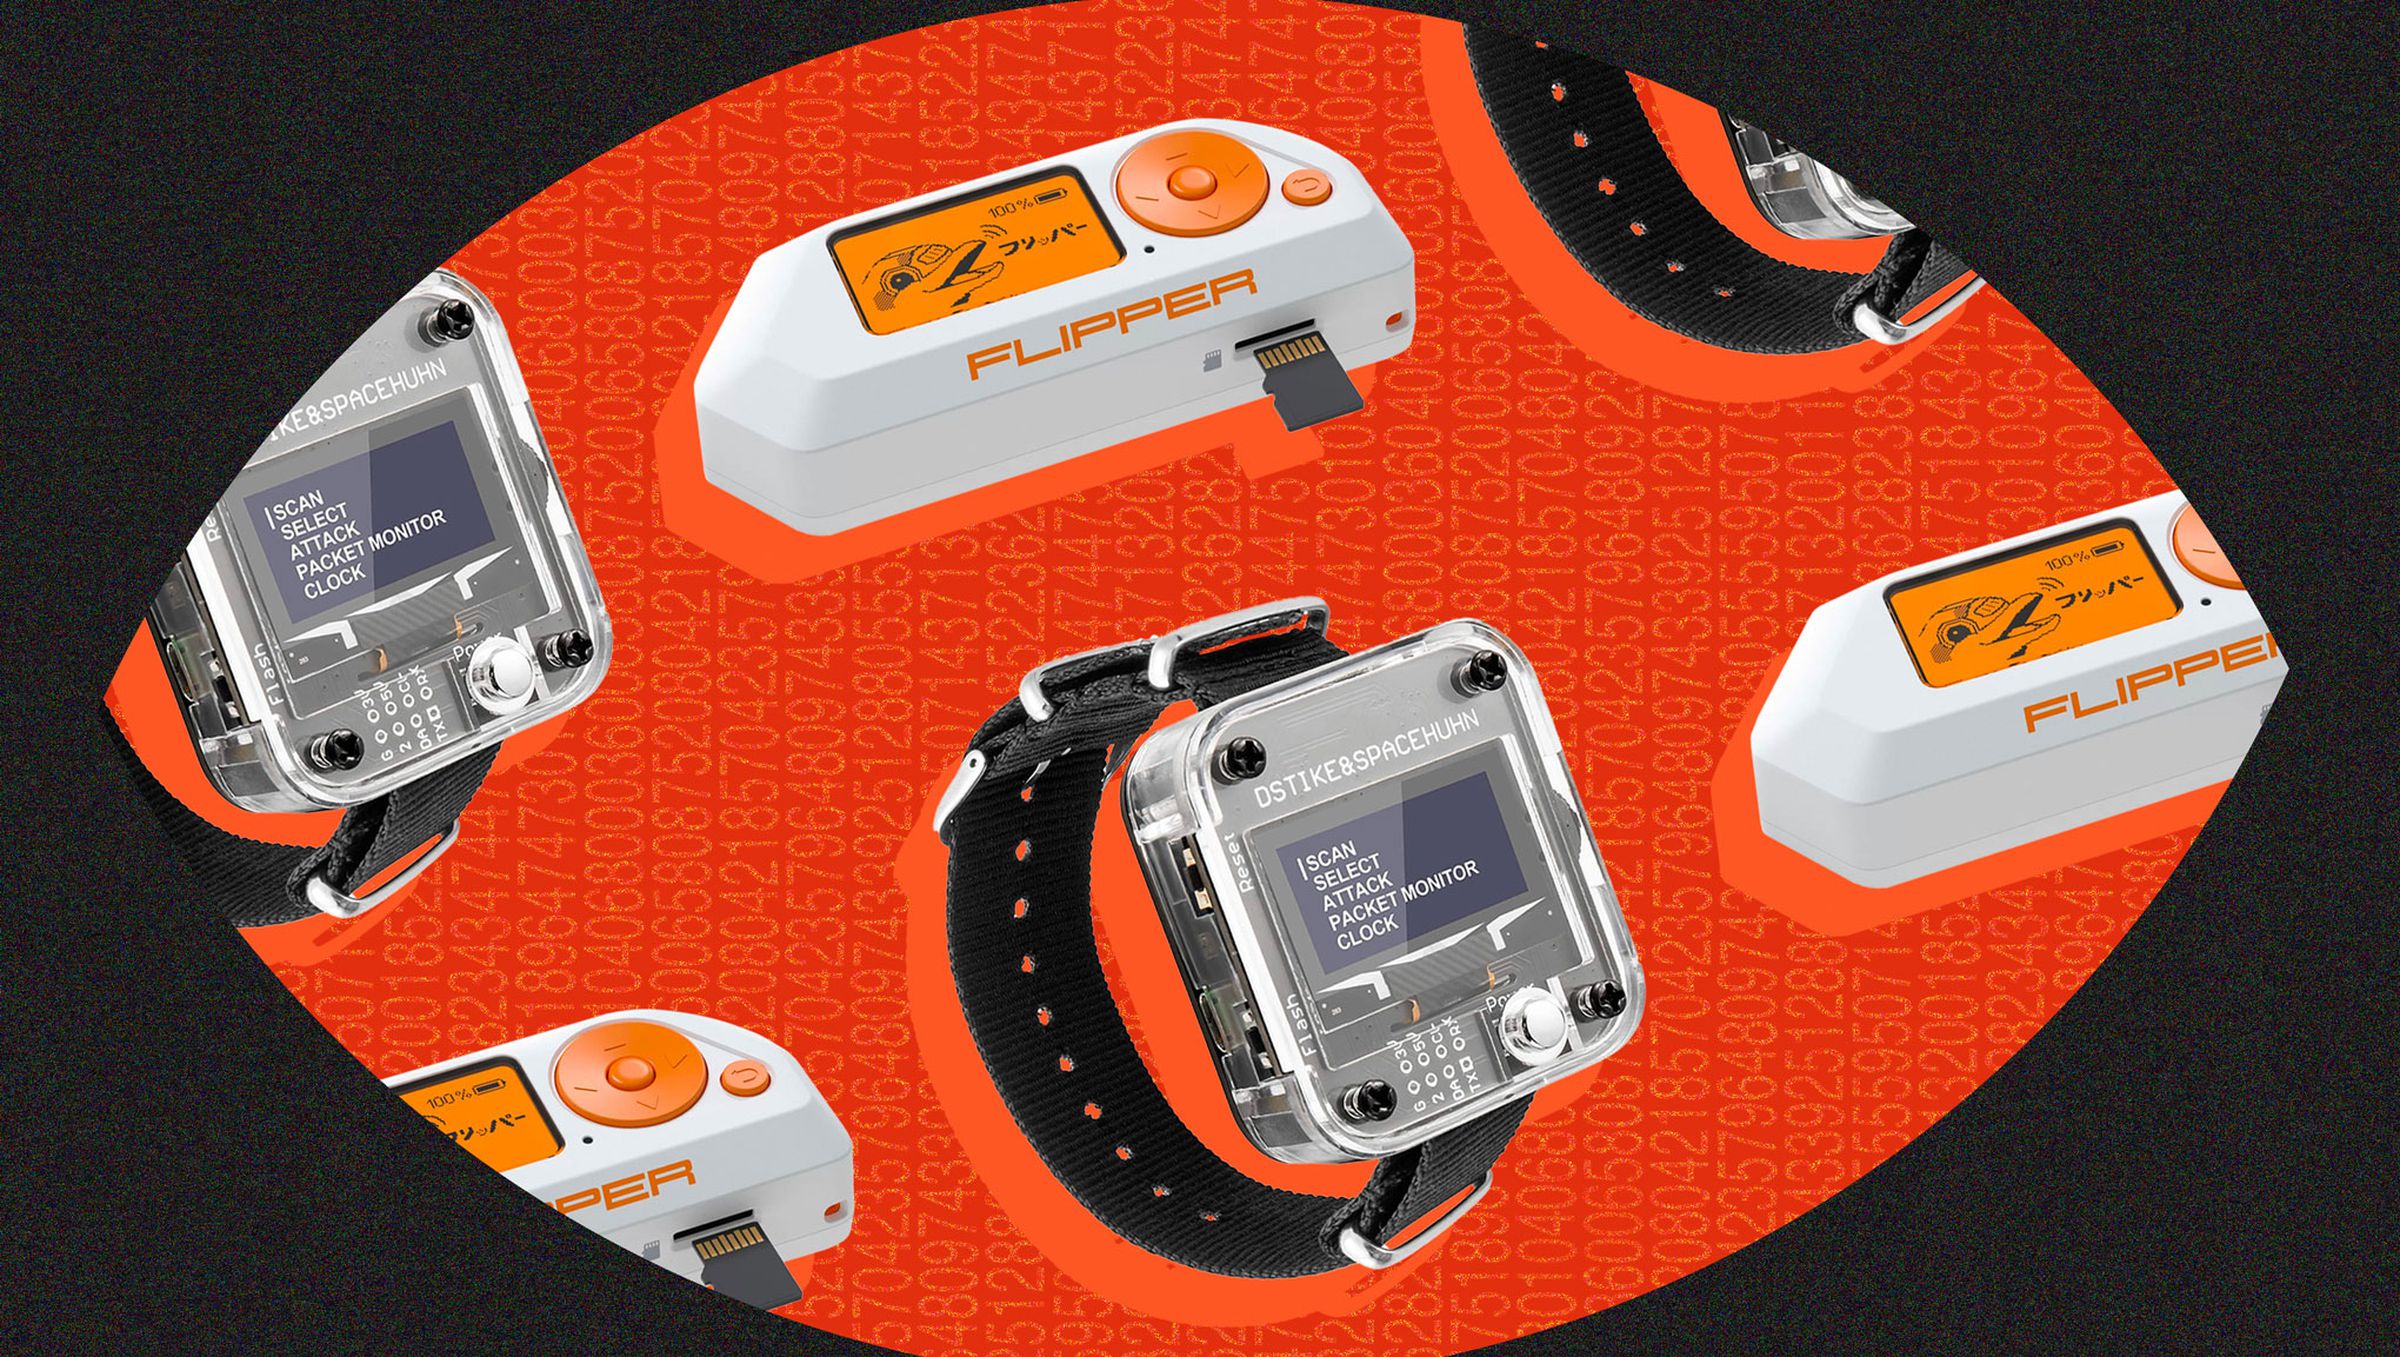 An eye-shaped opening reveals a Flipper Mini and open-hardware watch, set against an orange background.